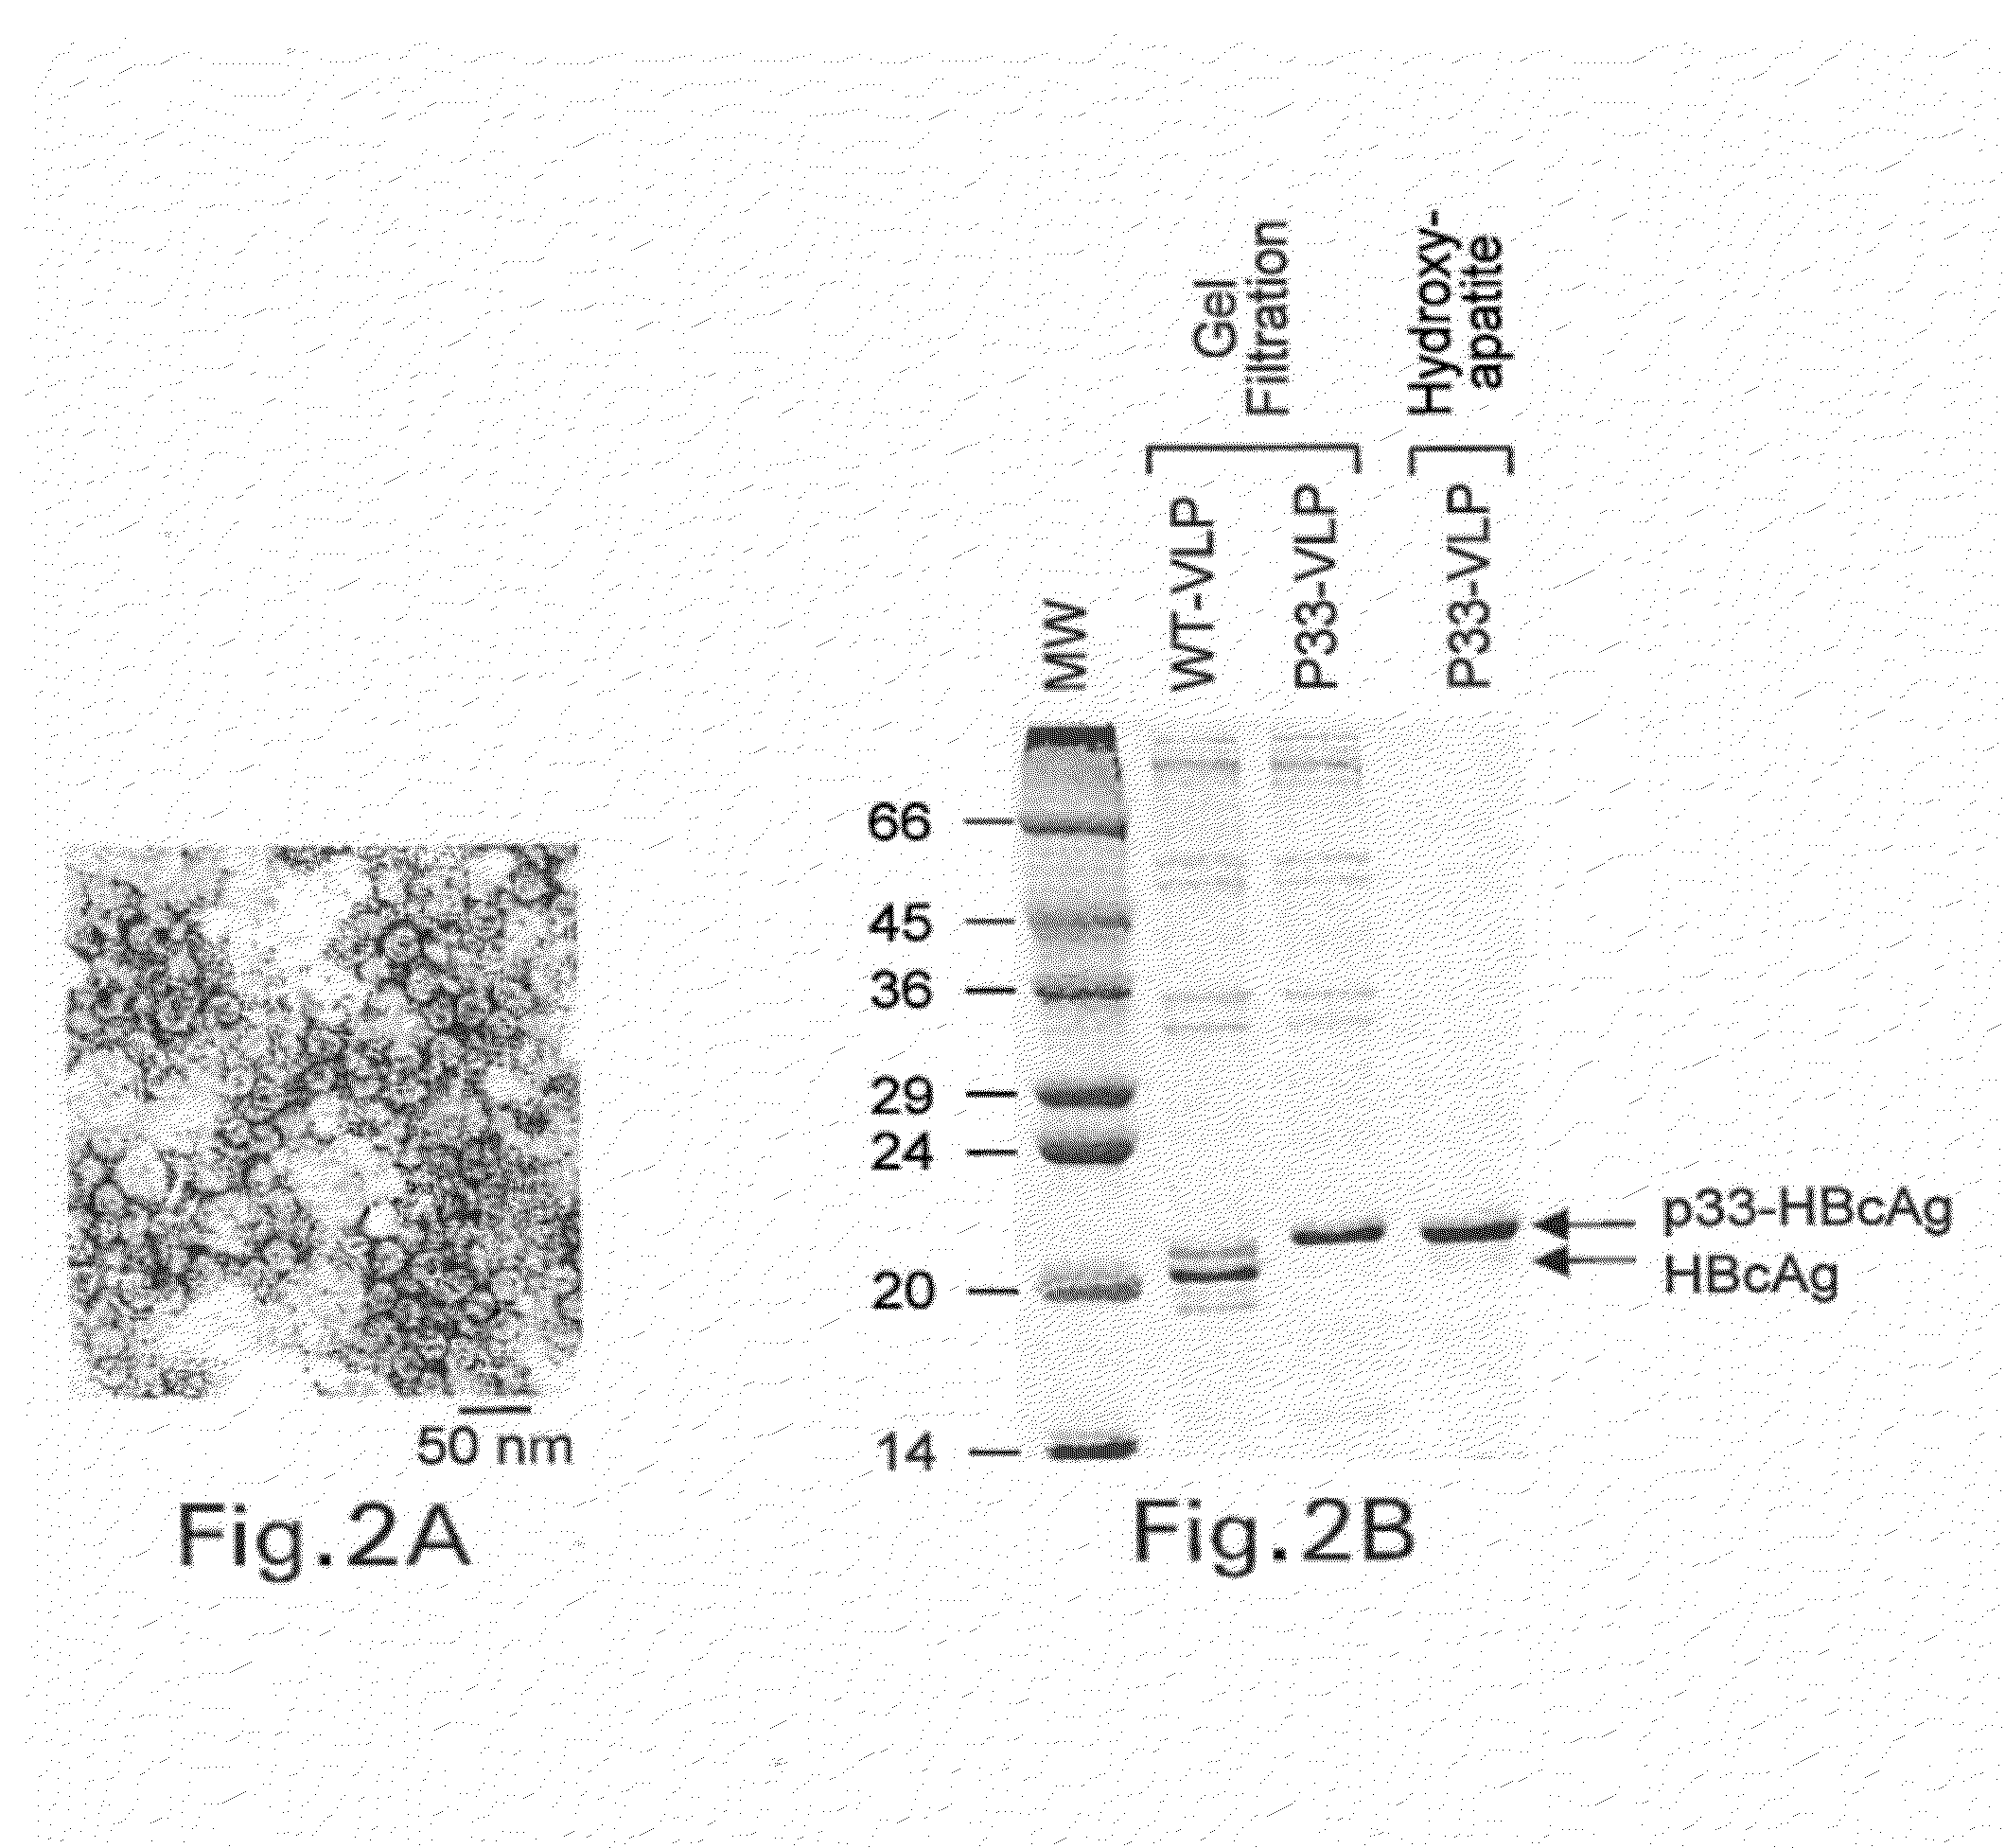 Packaging of Immunostimulatory Substances into Virus-Like Particles: Method of Preparation and Use